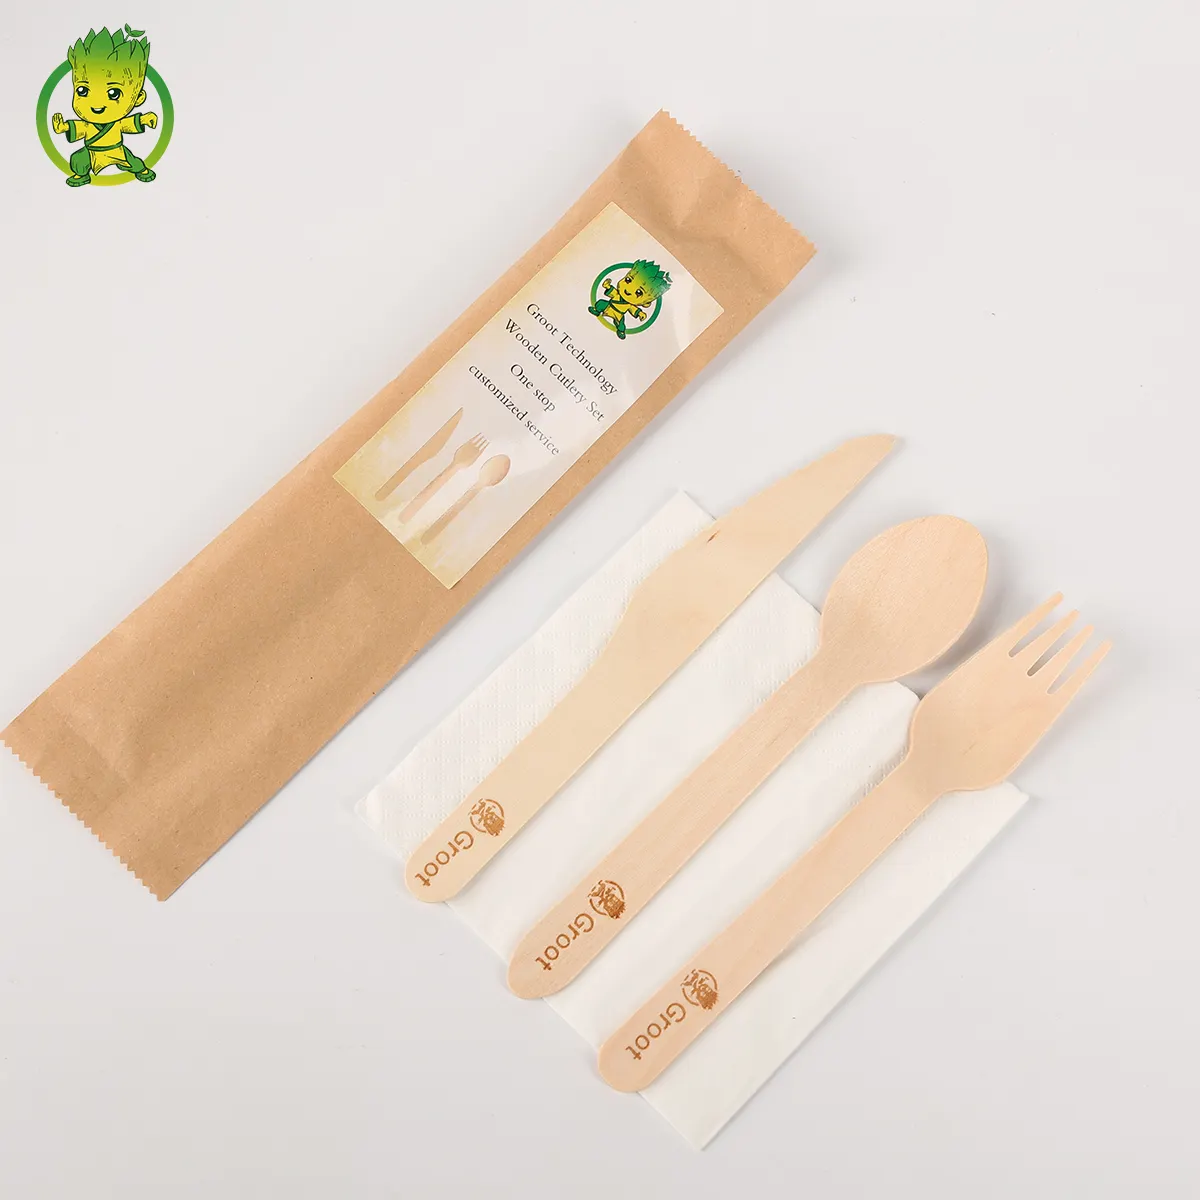 Eco Friendly Customize Size Degradable Biodegradable Tableware Utensils Wooden Cutlery Disposable Spoons Forks Knives Set